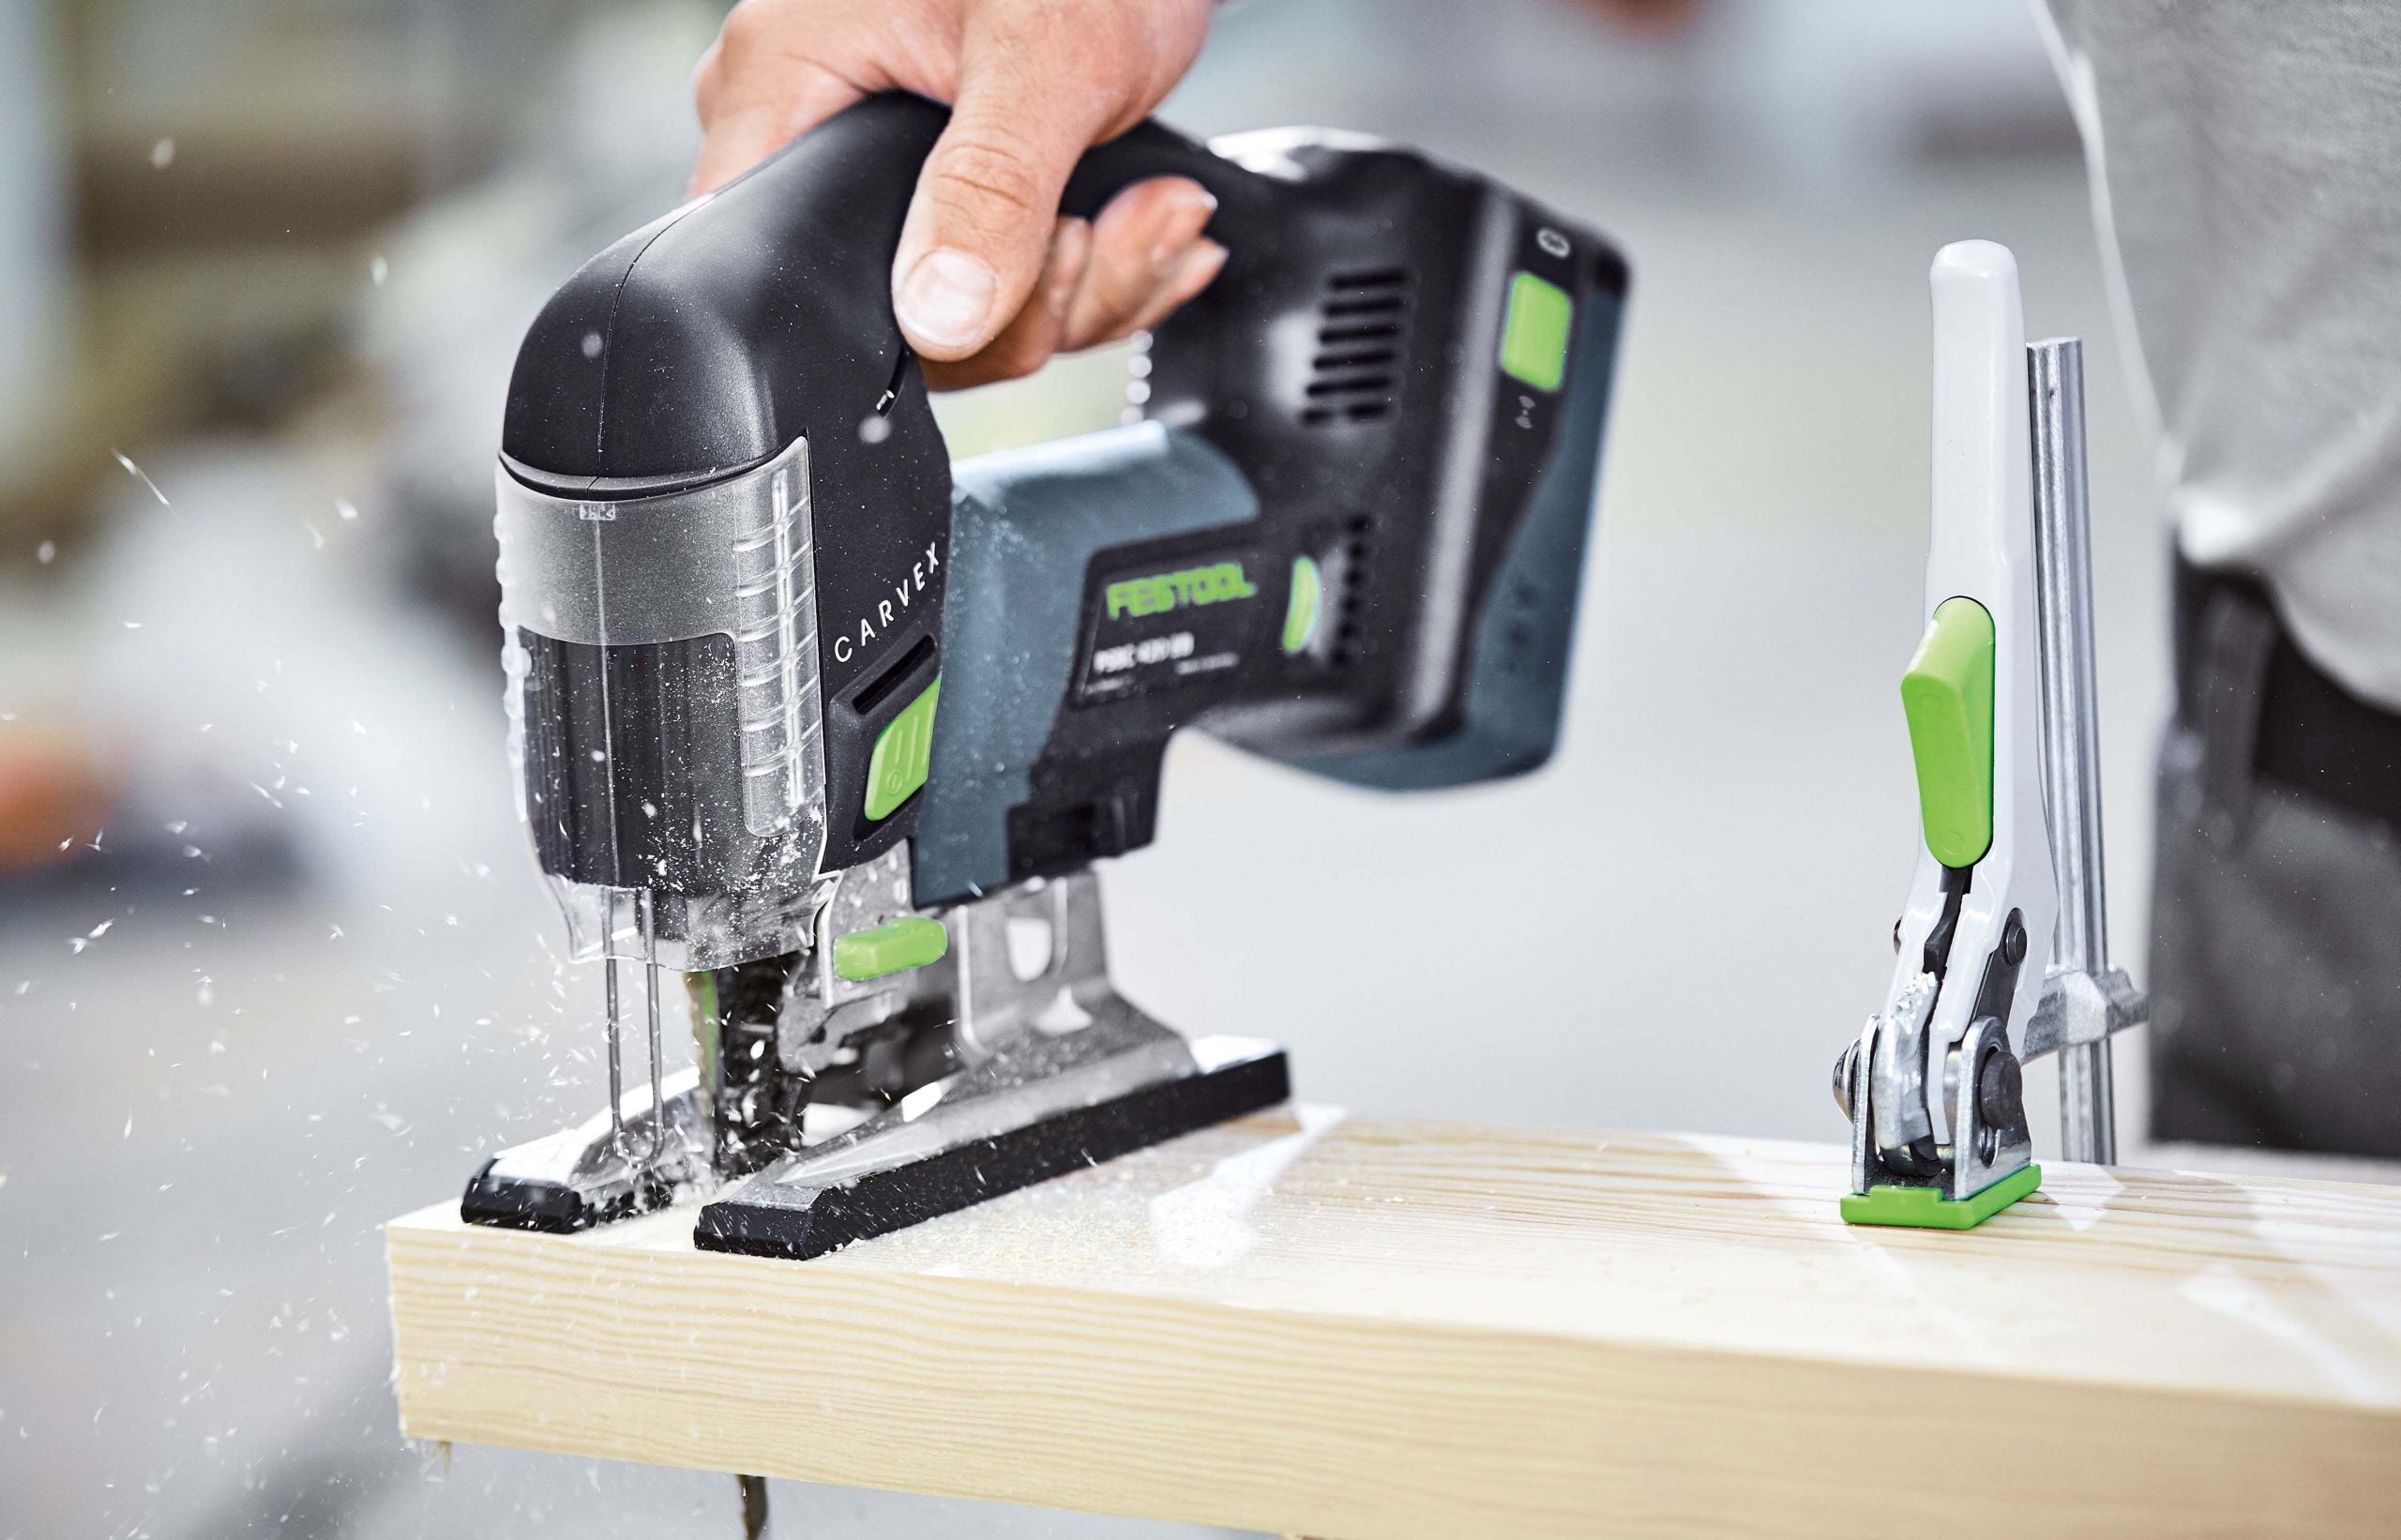 18V Cordless Carvex D Handle Jigsaw Basic In Systainer PSBC 420 576530 by Festool